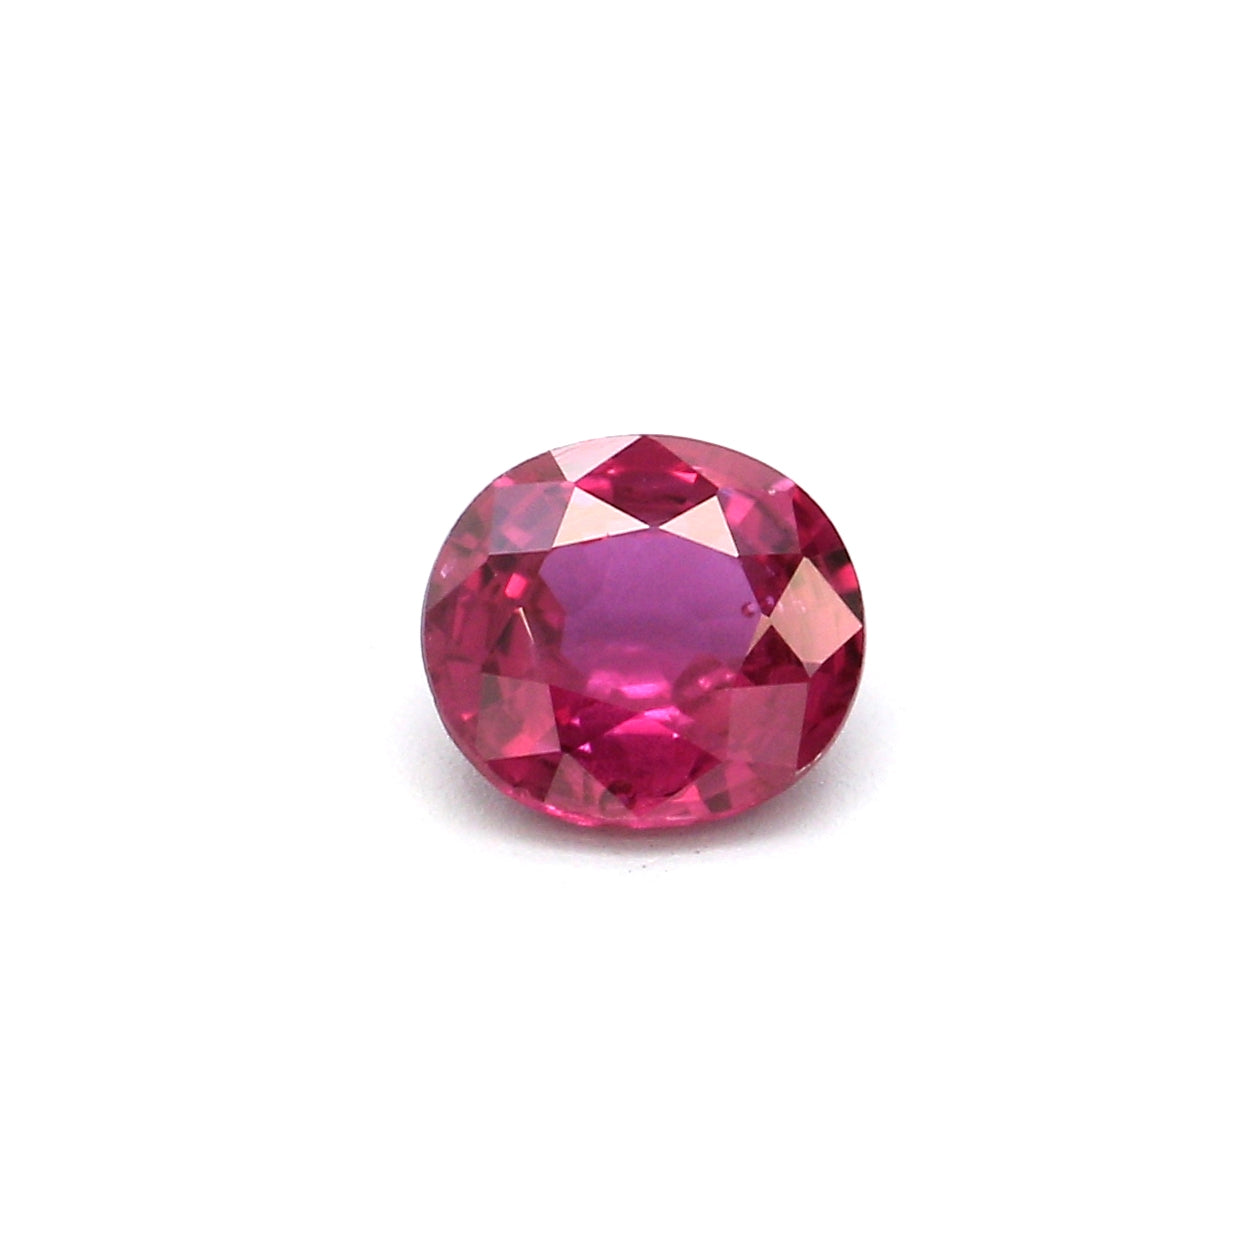 0.42ct Pinkish Red, Oval Ruby, Heated, Thailand - 4.89 x 4.43 x 2.36mm